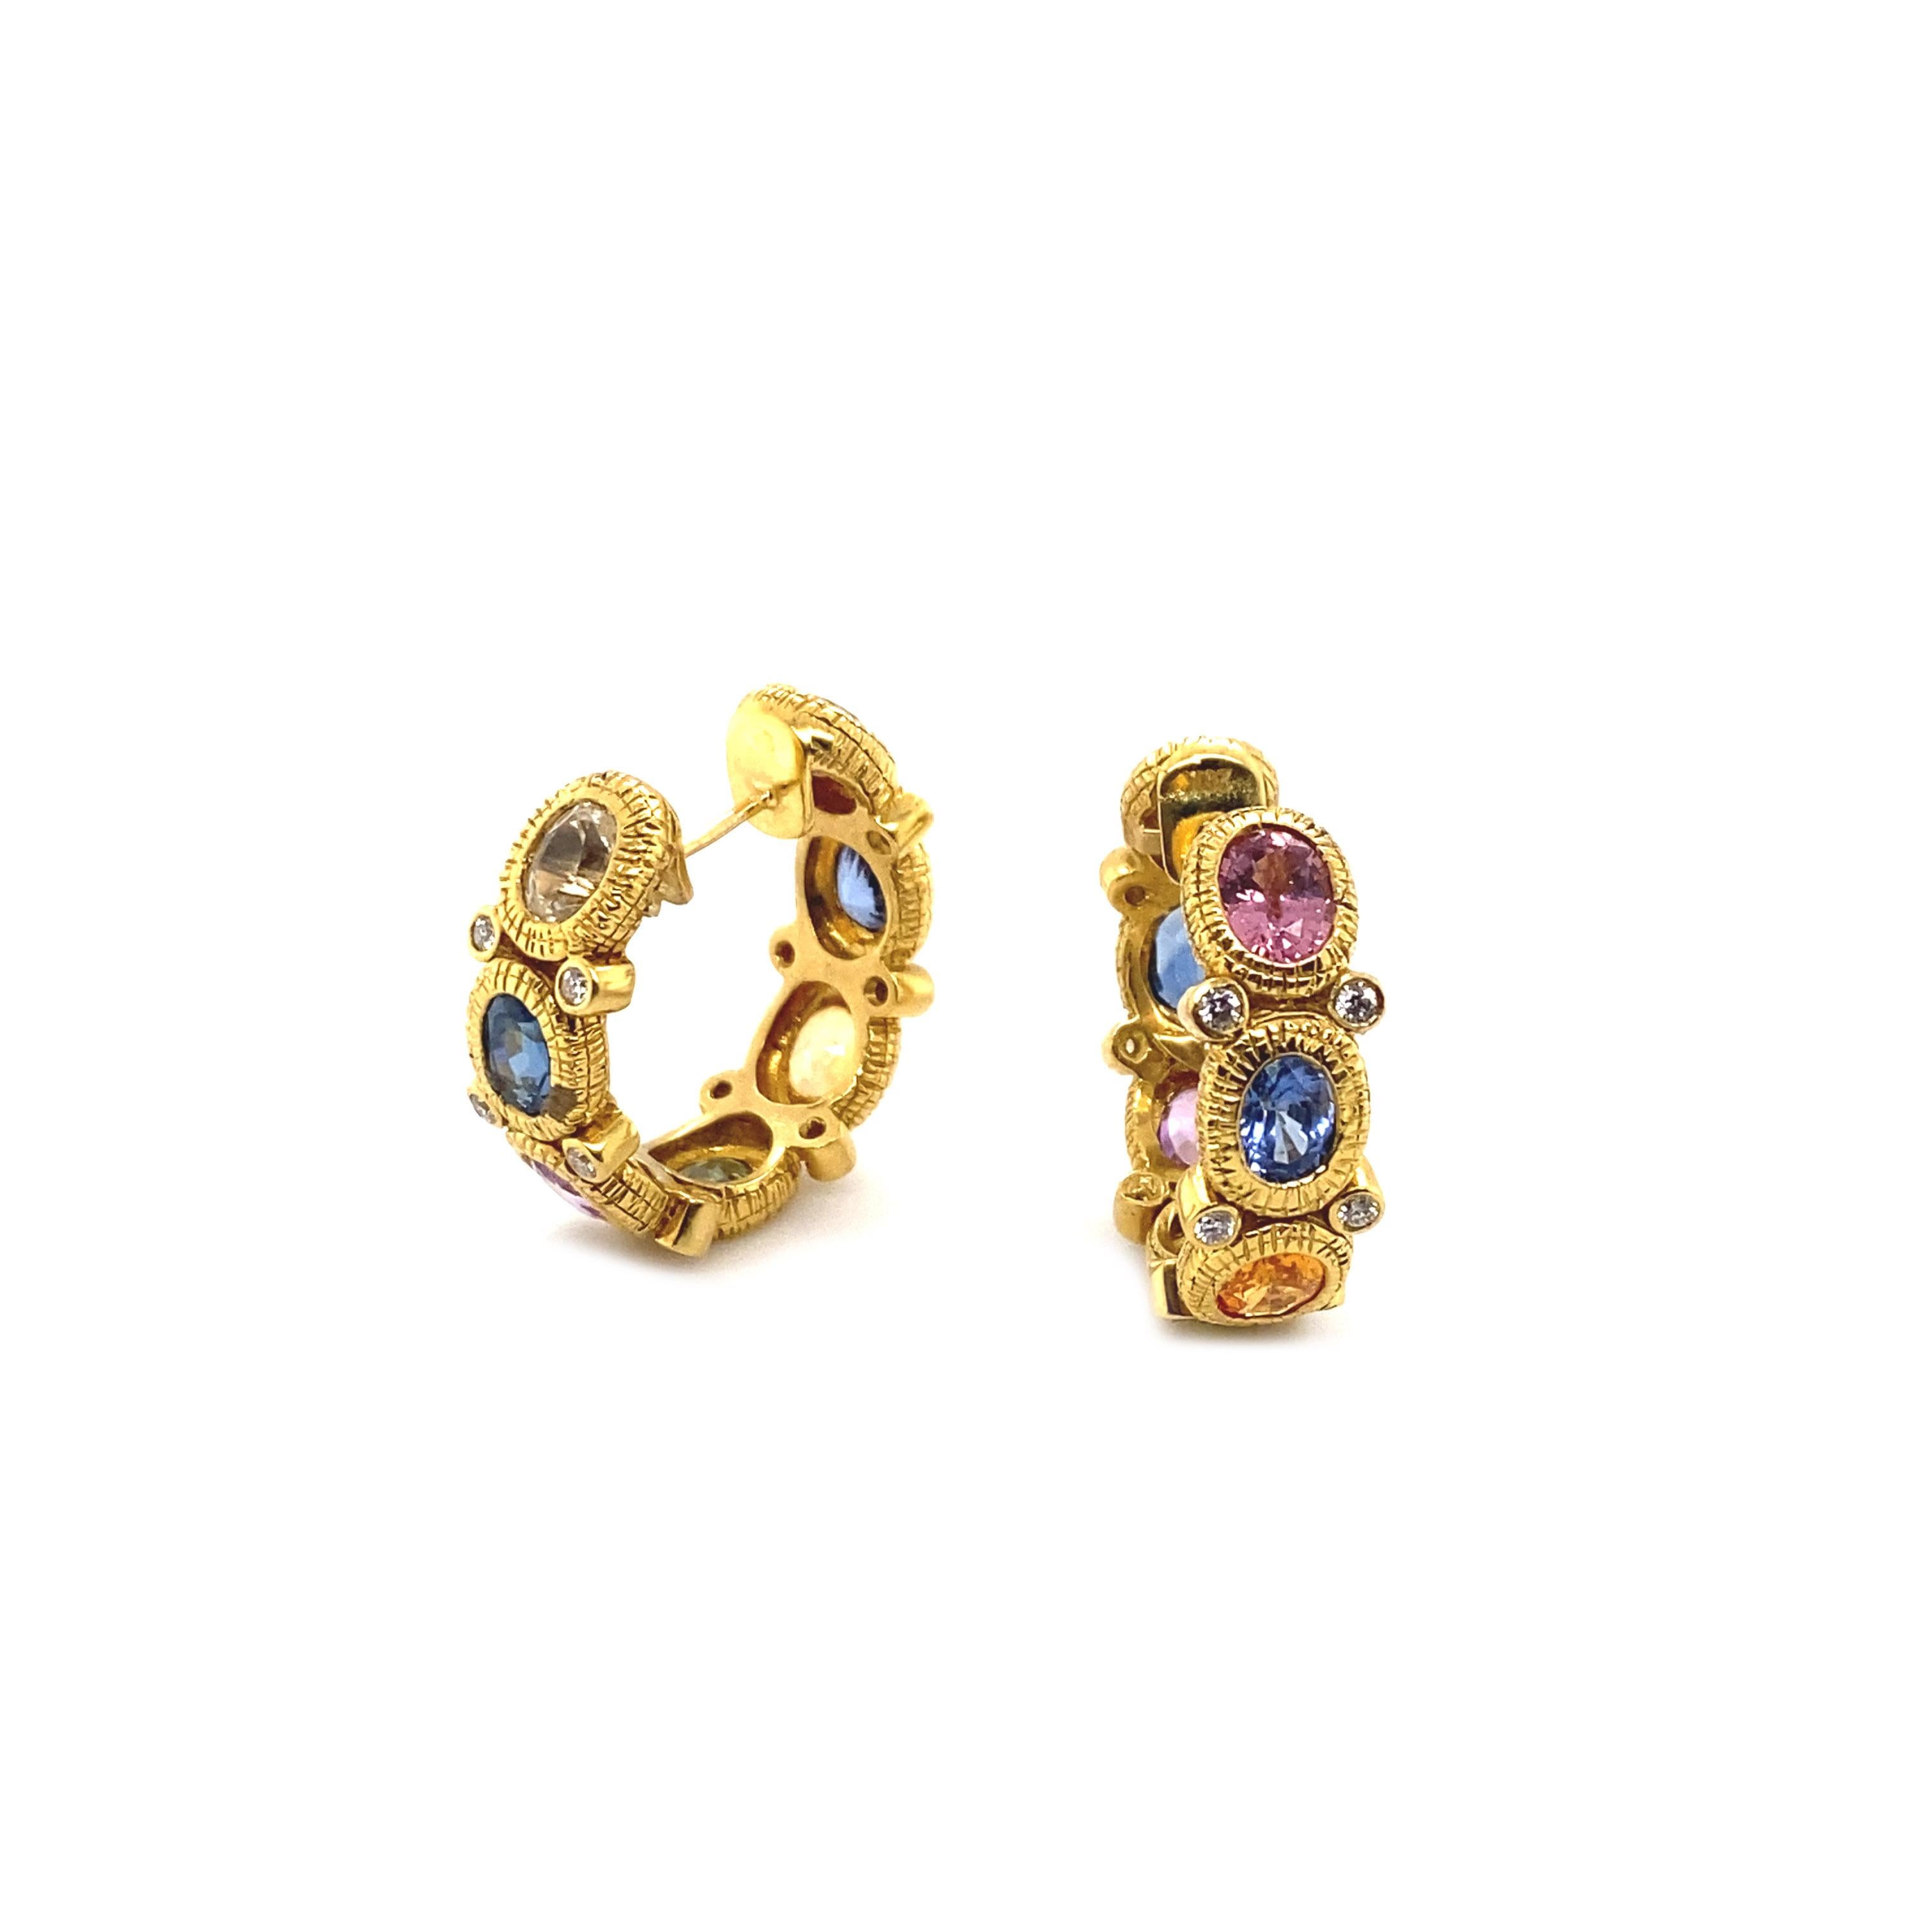 Eternity Huggy Hoops Earrings Set in 20 Karat Yellow Gold with 6.48cts Multi-Color Sapphire and Brilliant Diamonds.